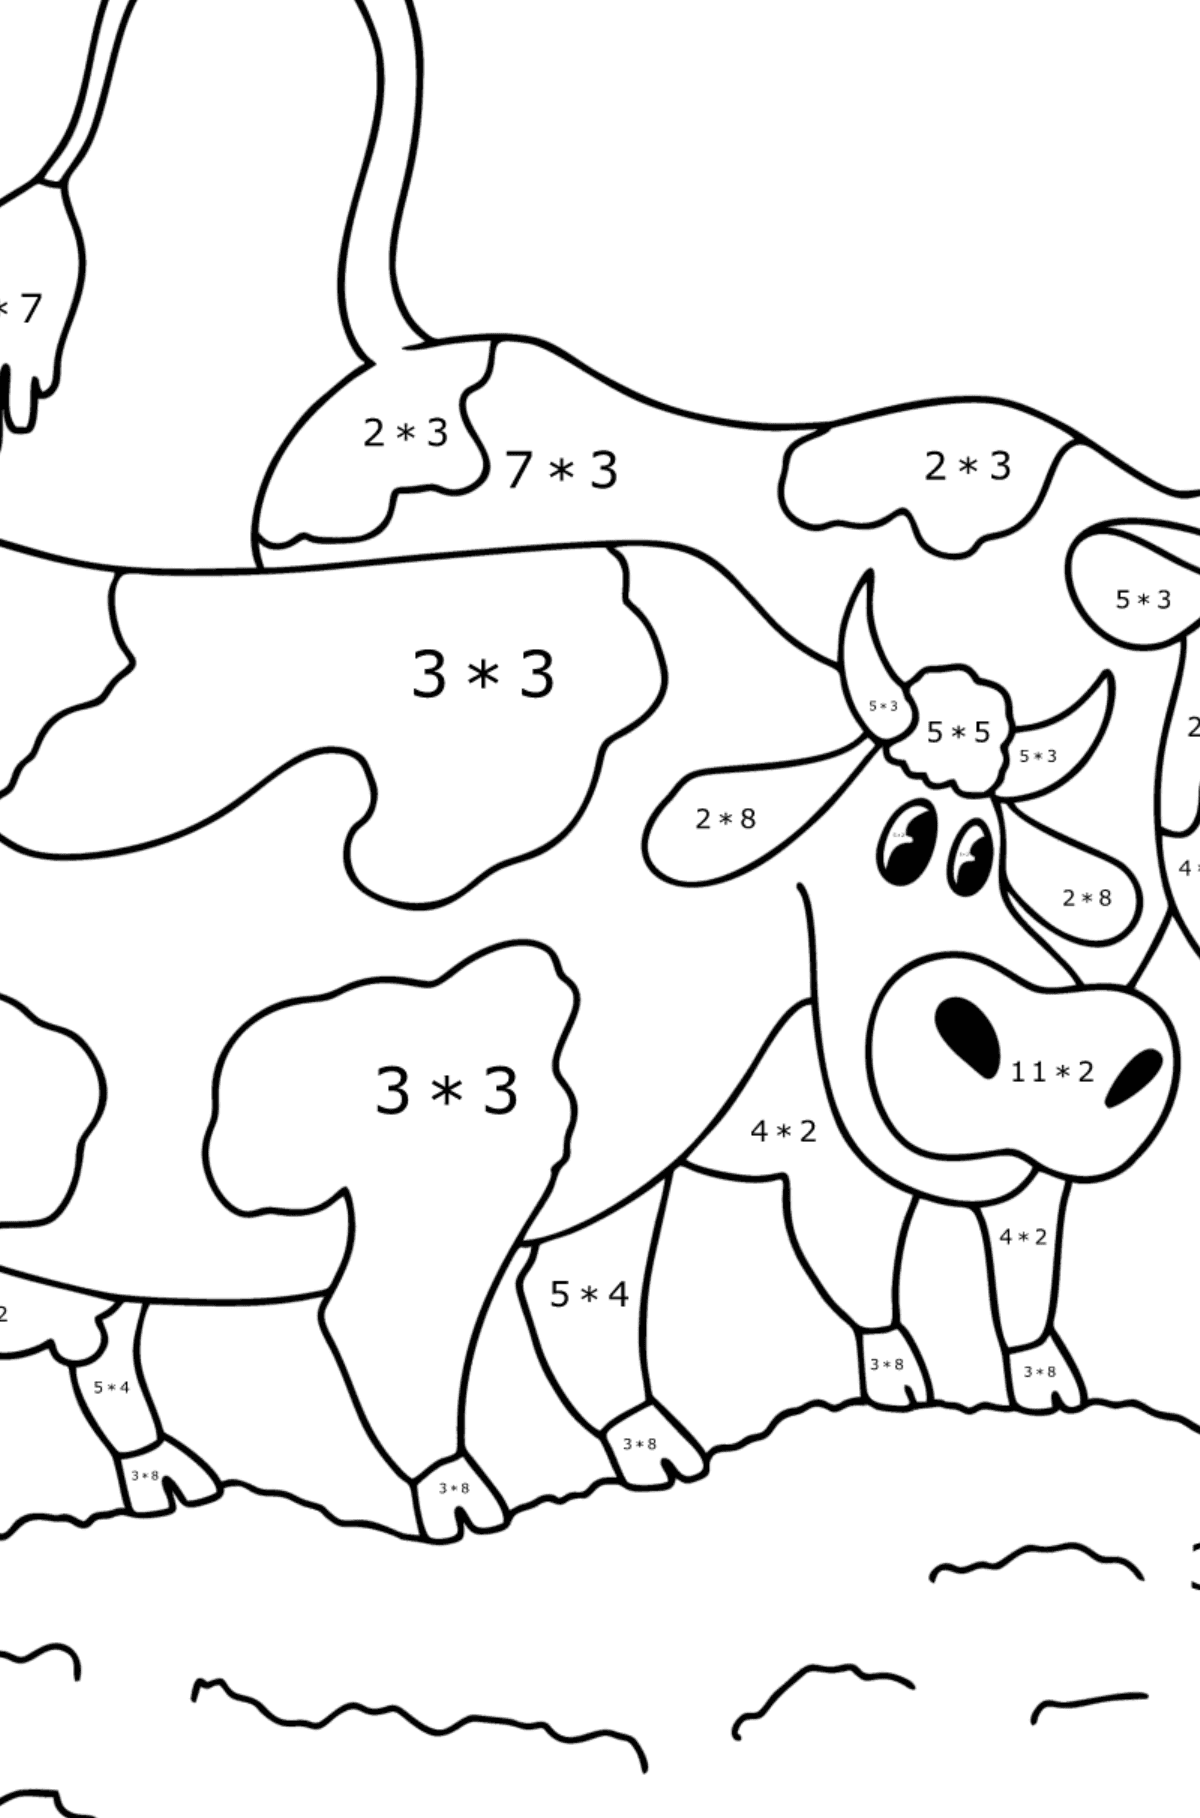 Two cows in the meadow Coloring page - Math Coloring - Multiplication for Kids